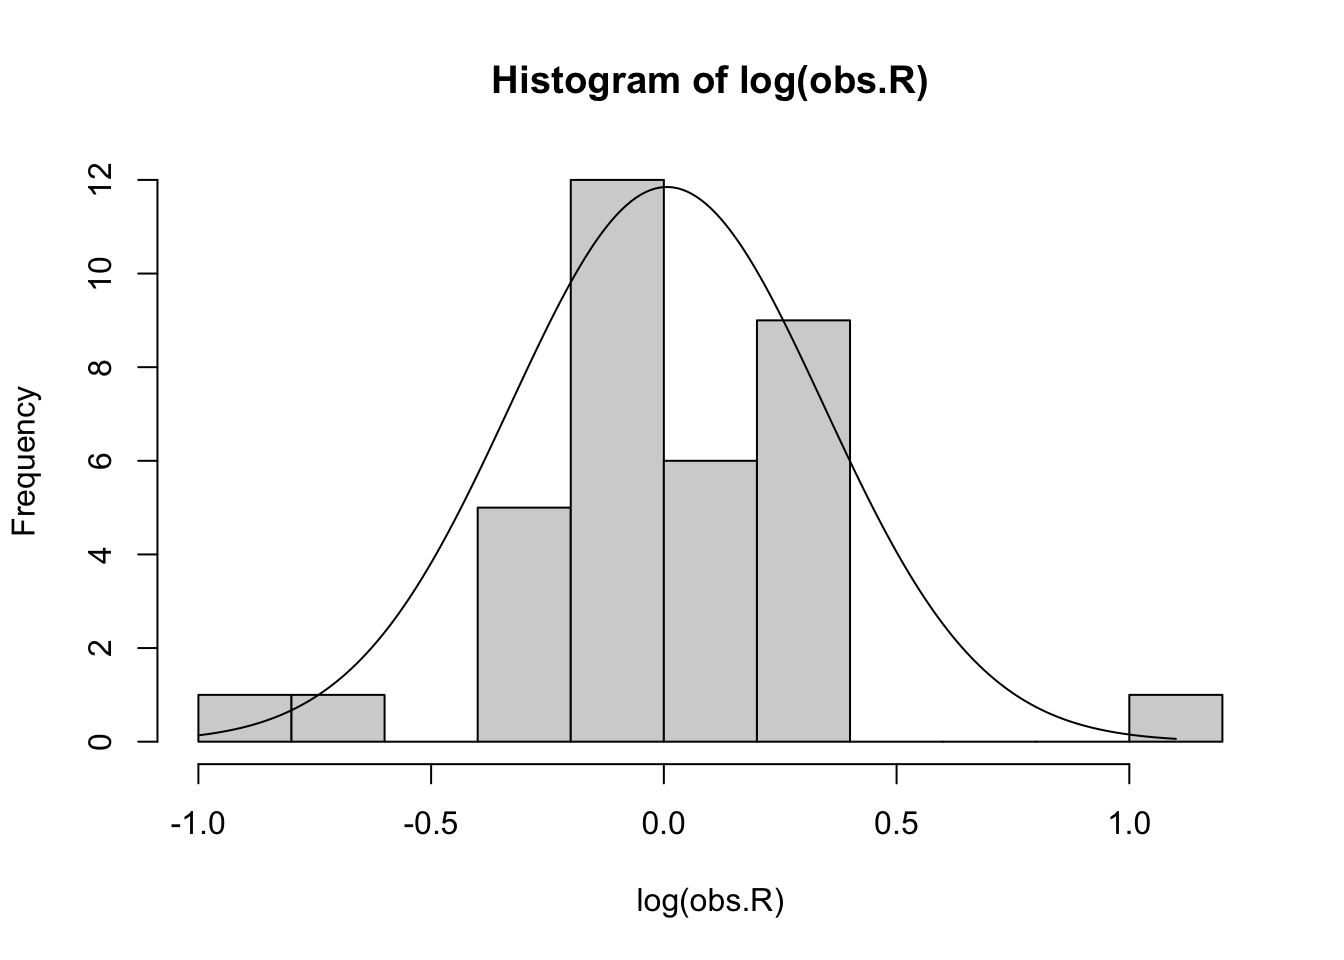 The logarithms of the observed R arrayed in a histogram (left) and a quantile-quantile plot comparing our log-growth rates to the normal distribution (right). Our data seem somewhat approximated by a Normal distribution whose mean and standard deviation are derived from the log-transformed data. The probability distribution has been rescaled to be visible on this graph. However, the q-q plot shows that the sample (y-axis) includes values that are smaller and larger than predicted by the normal distribution.